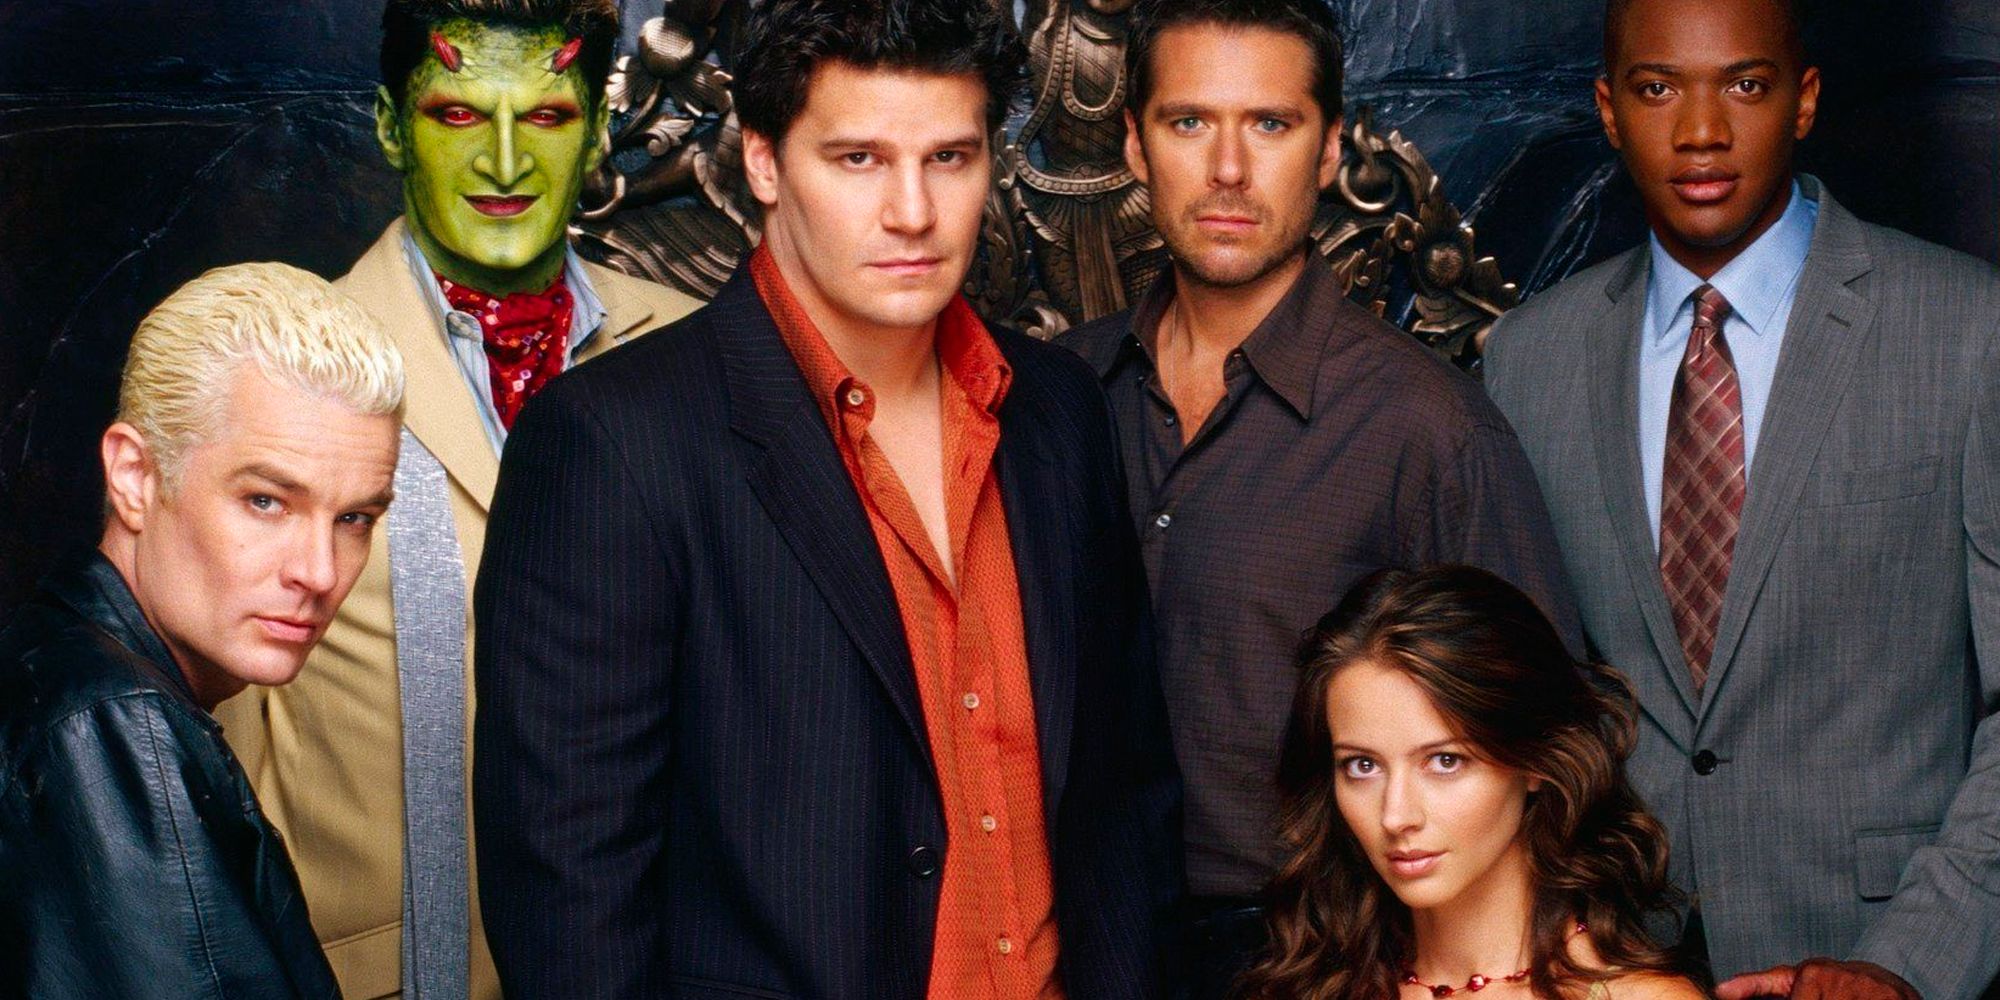 The cast of the Angel TV series in season 5